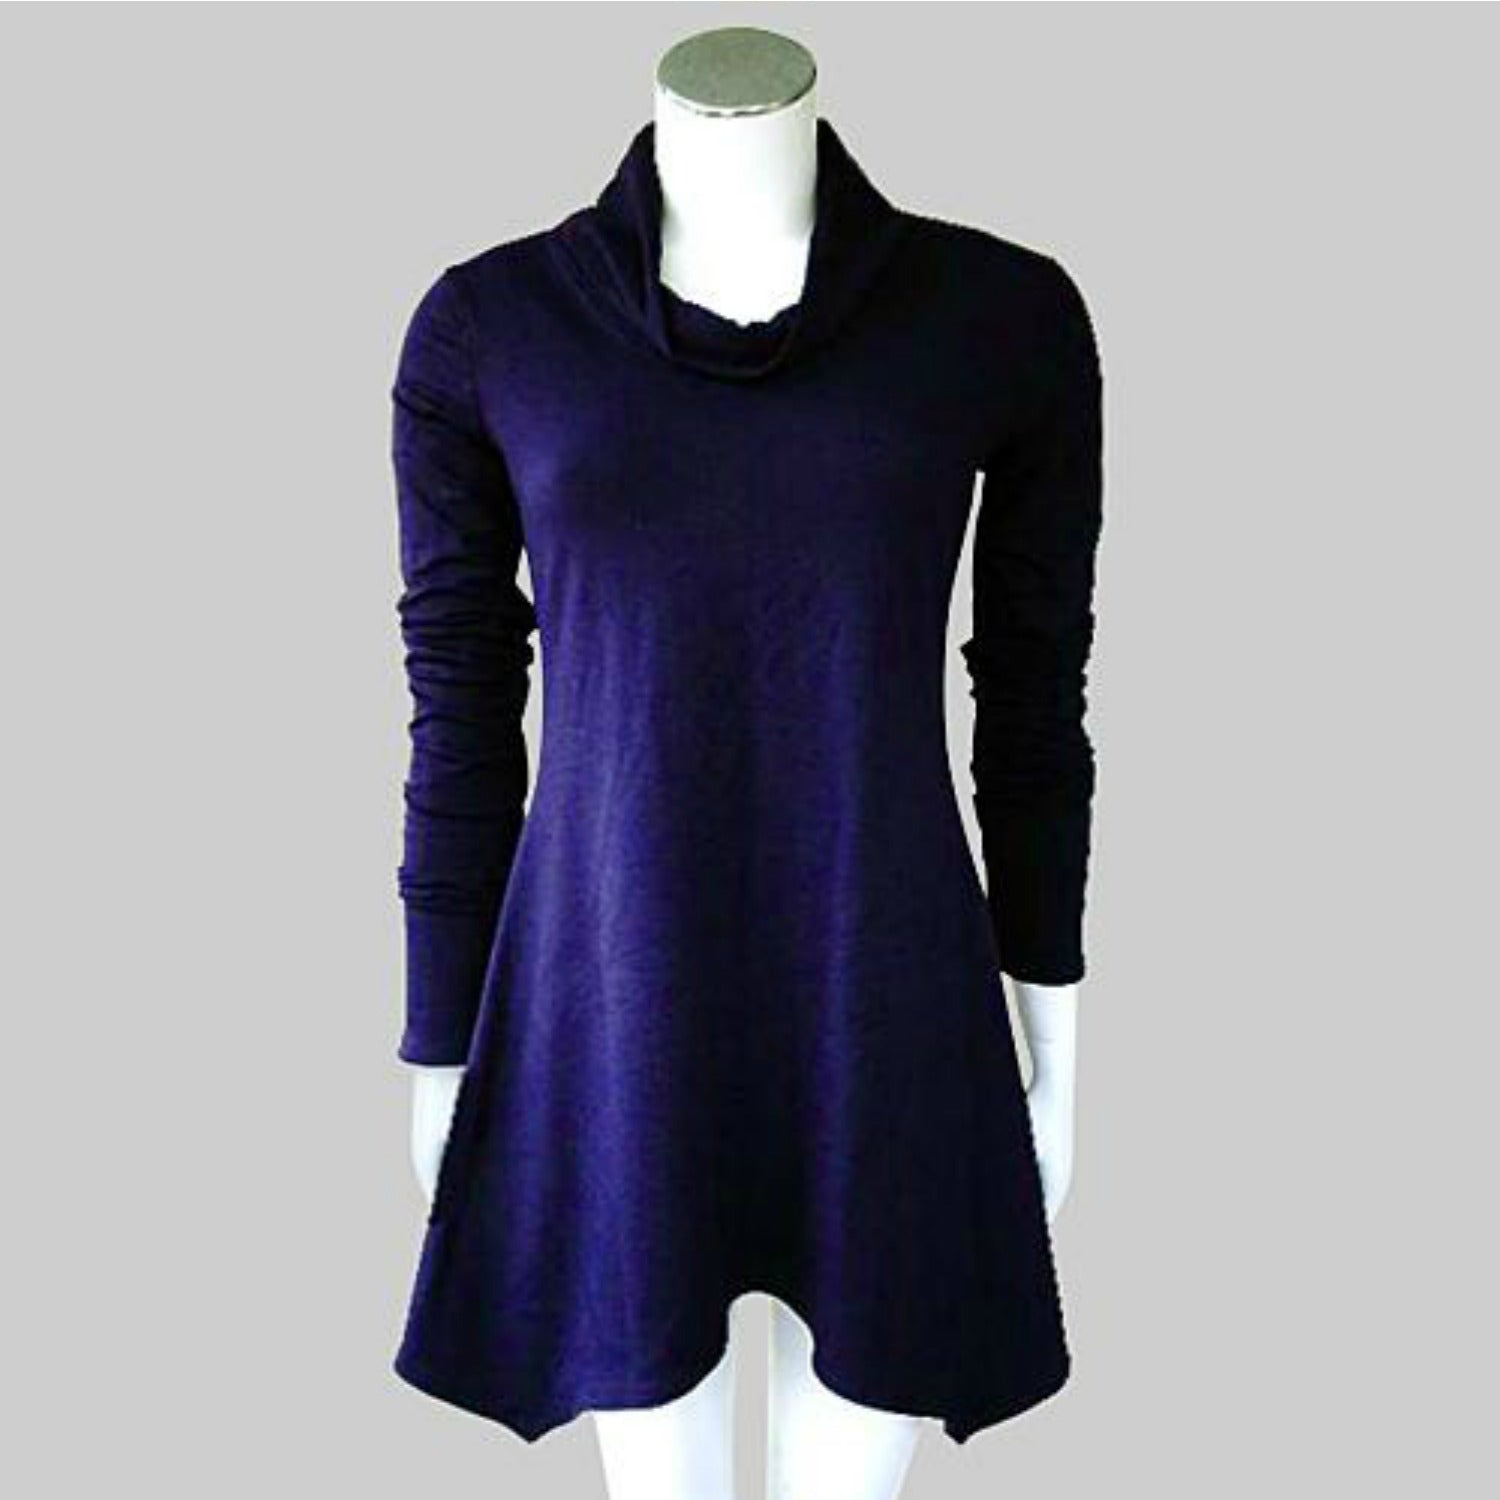 Women's Fit and Flare Knit Dress, Tunic, Top Asymmetrical Shaped